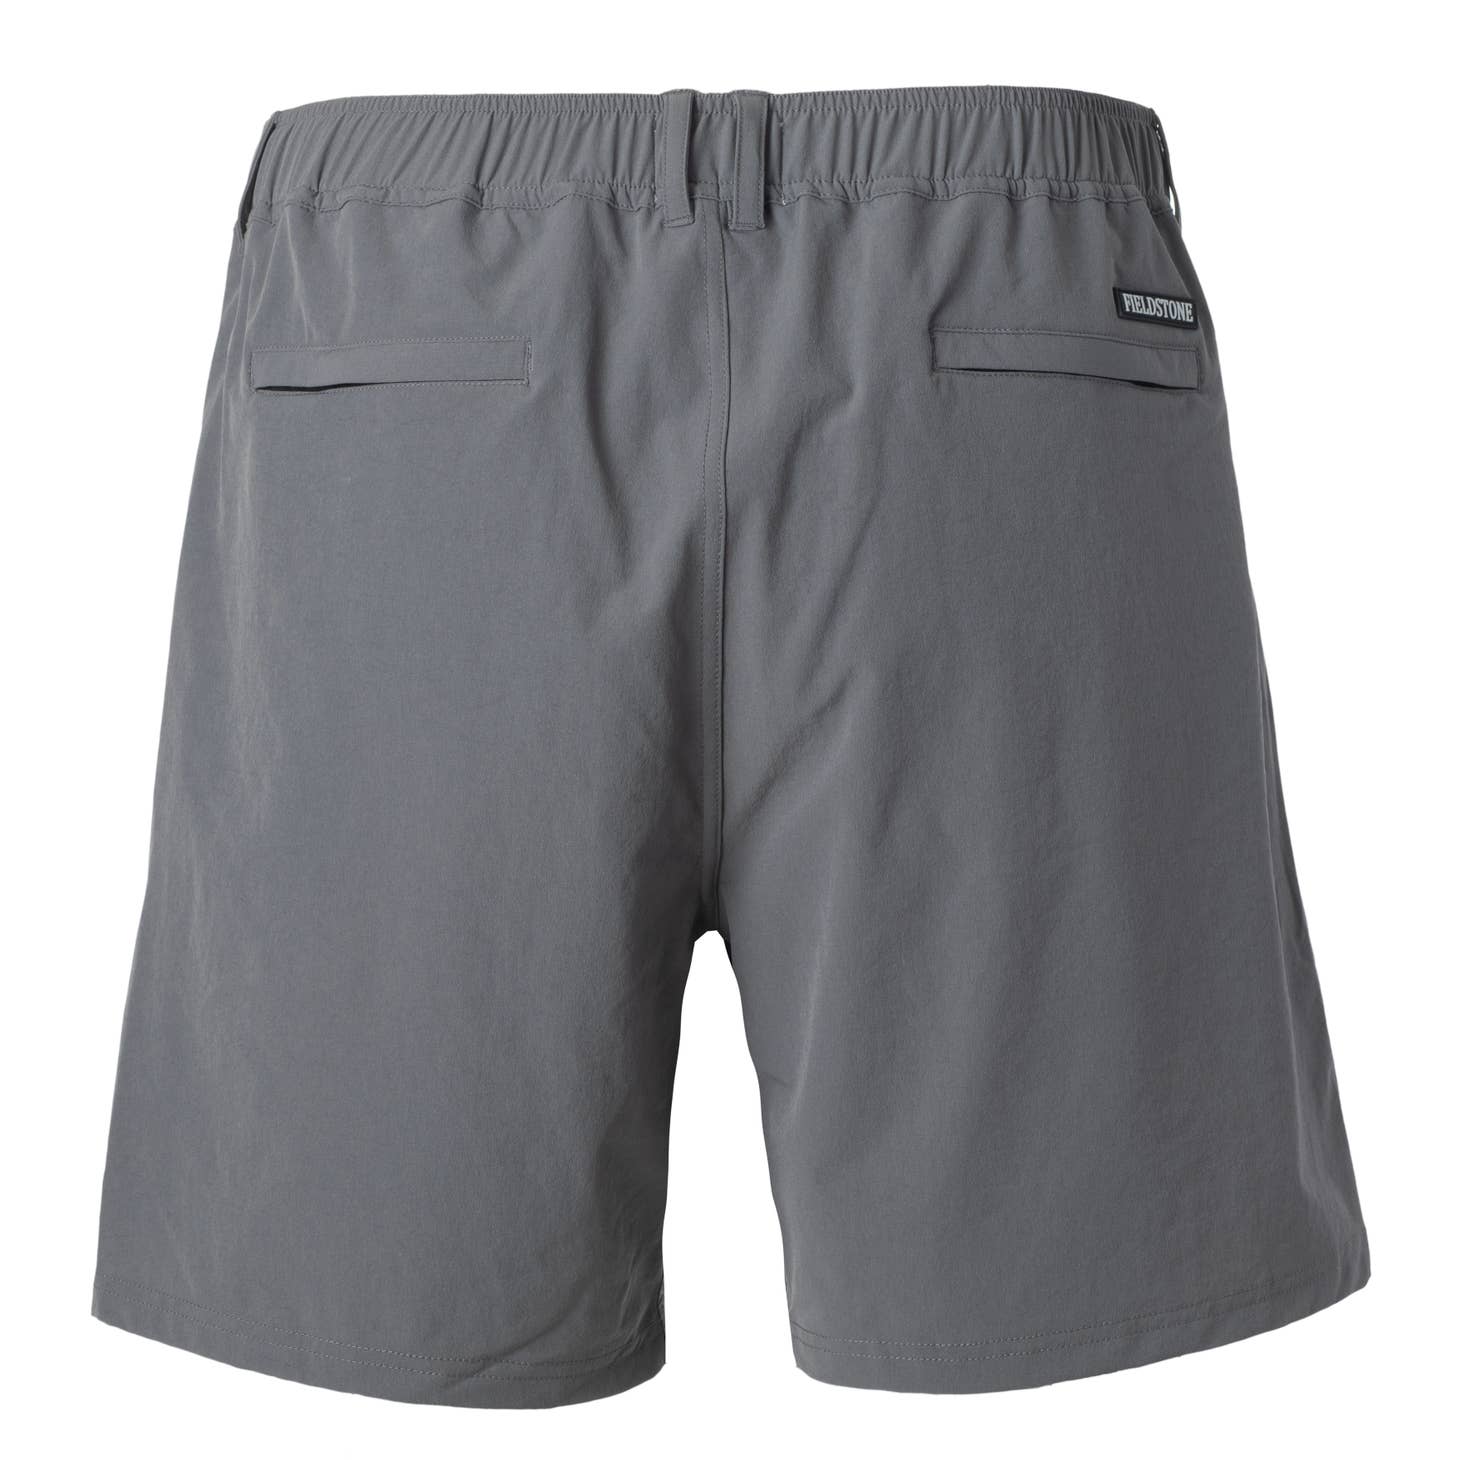 A Fieldstone Outdoor Provisions Co. Rambler Shorts with a black logo on the side.